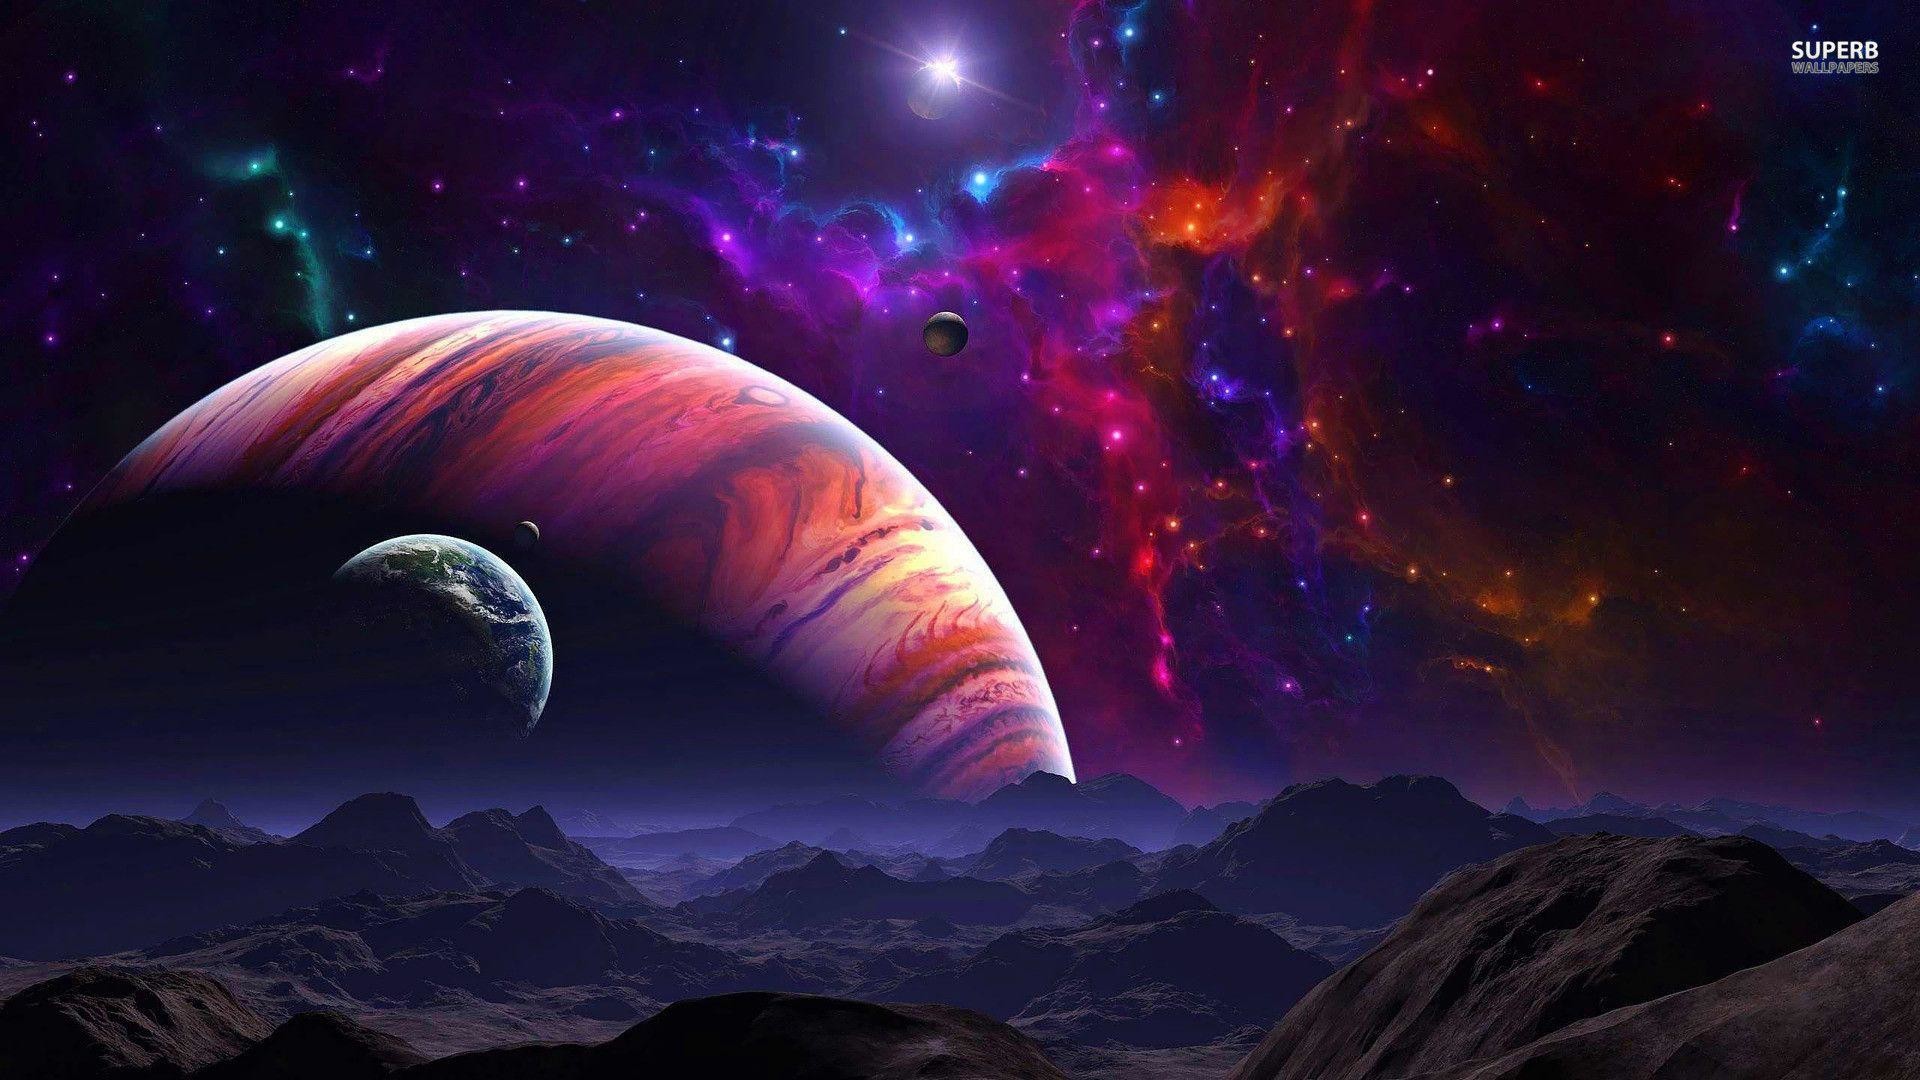 Purple Space Wallpaper Pictures 5 HD Wallpapers | lzamgs.